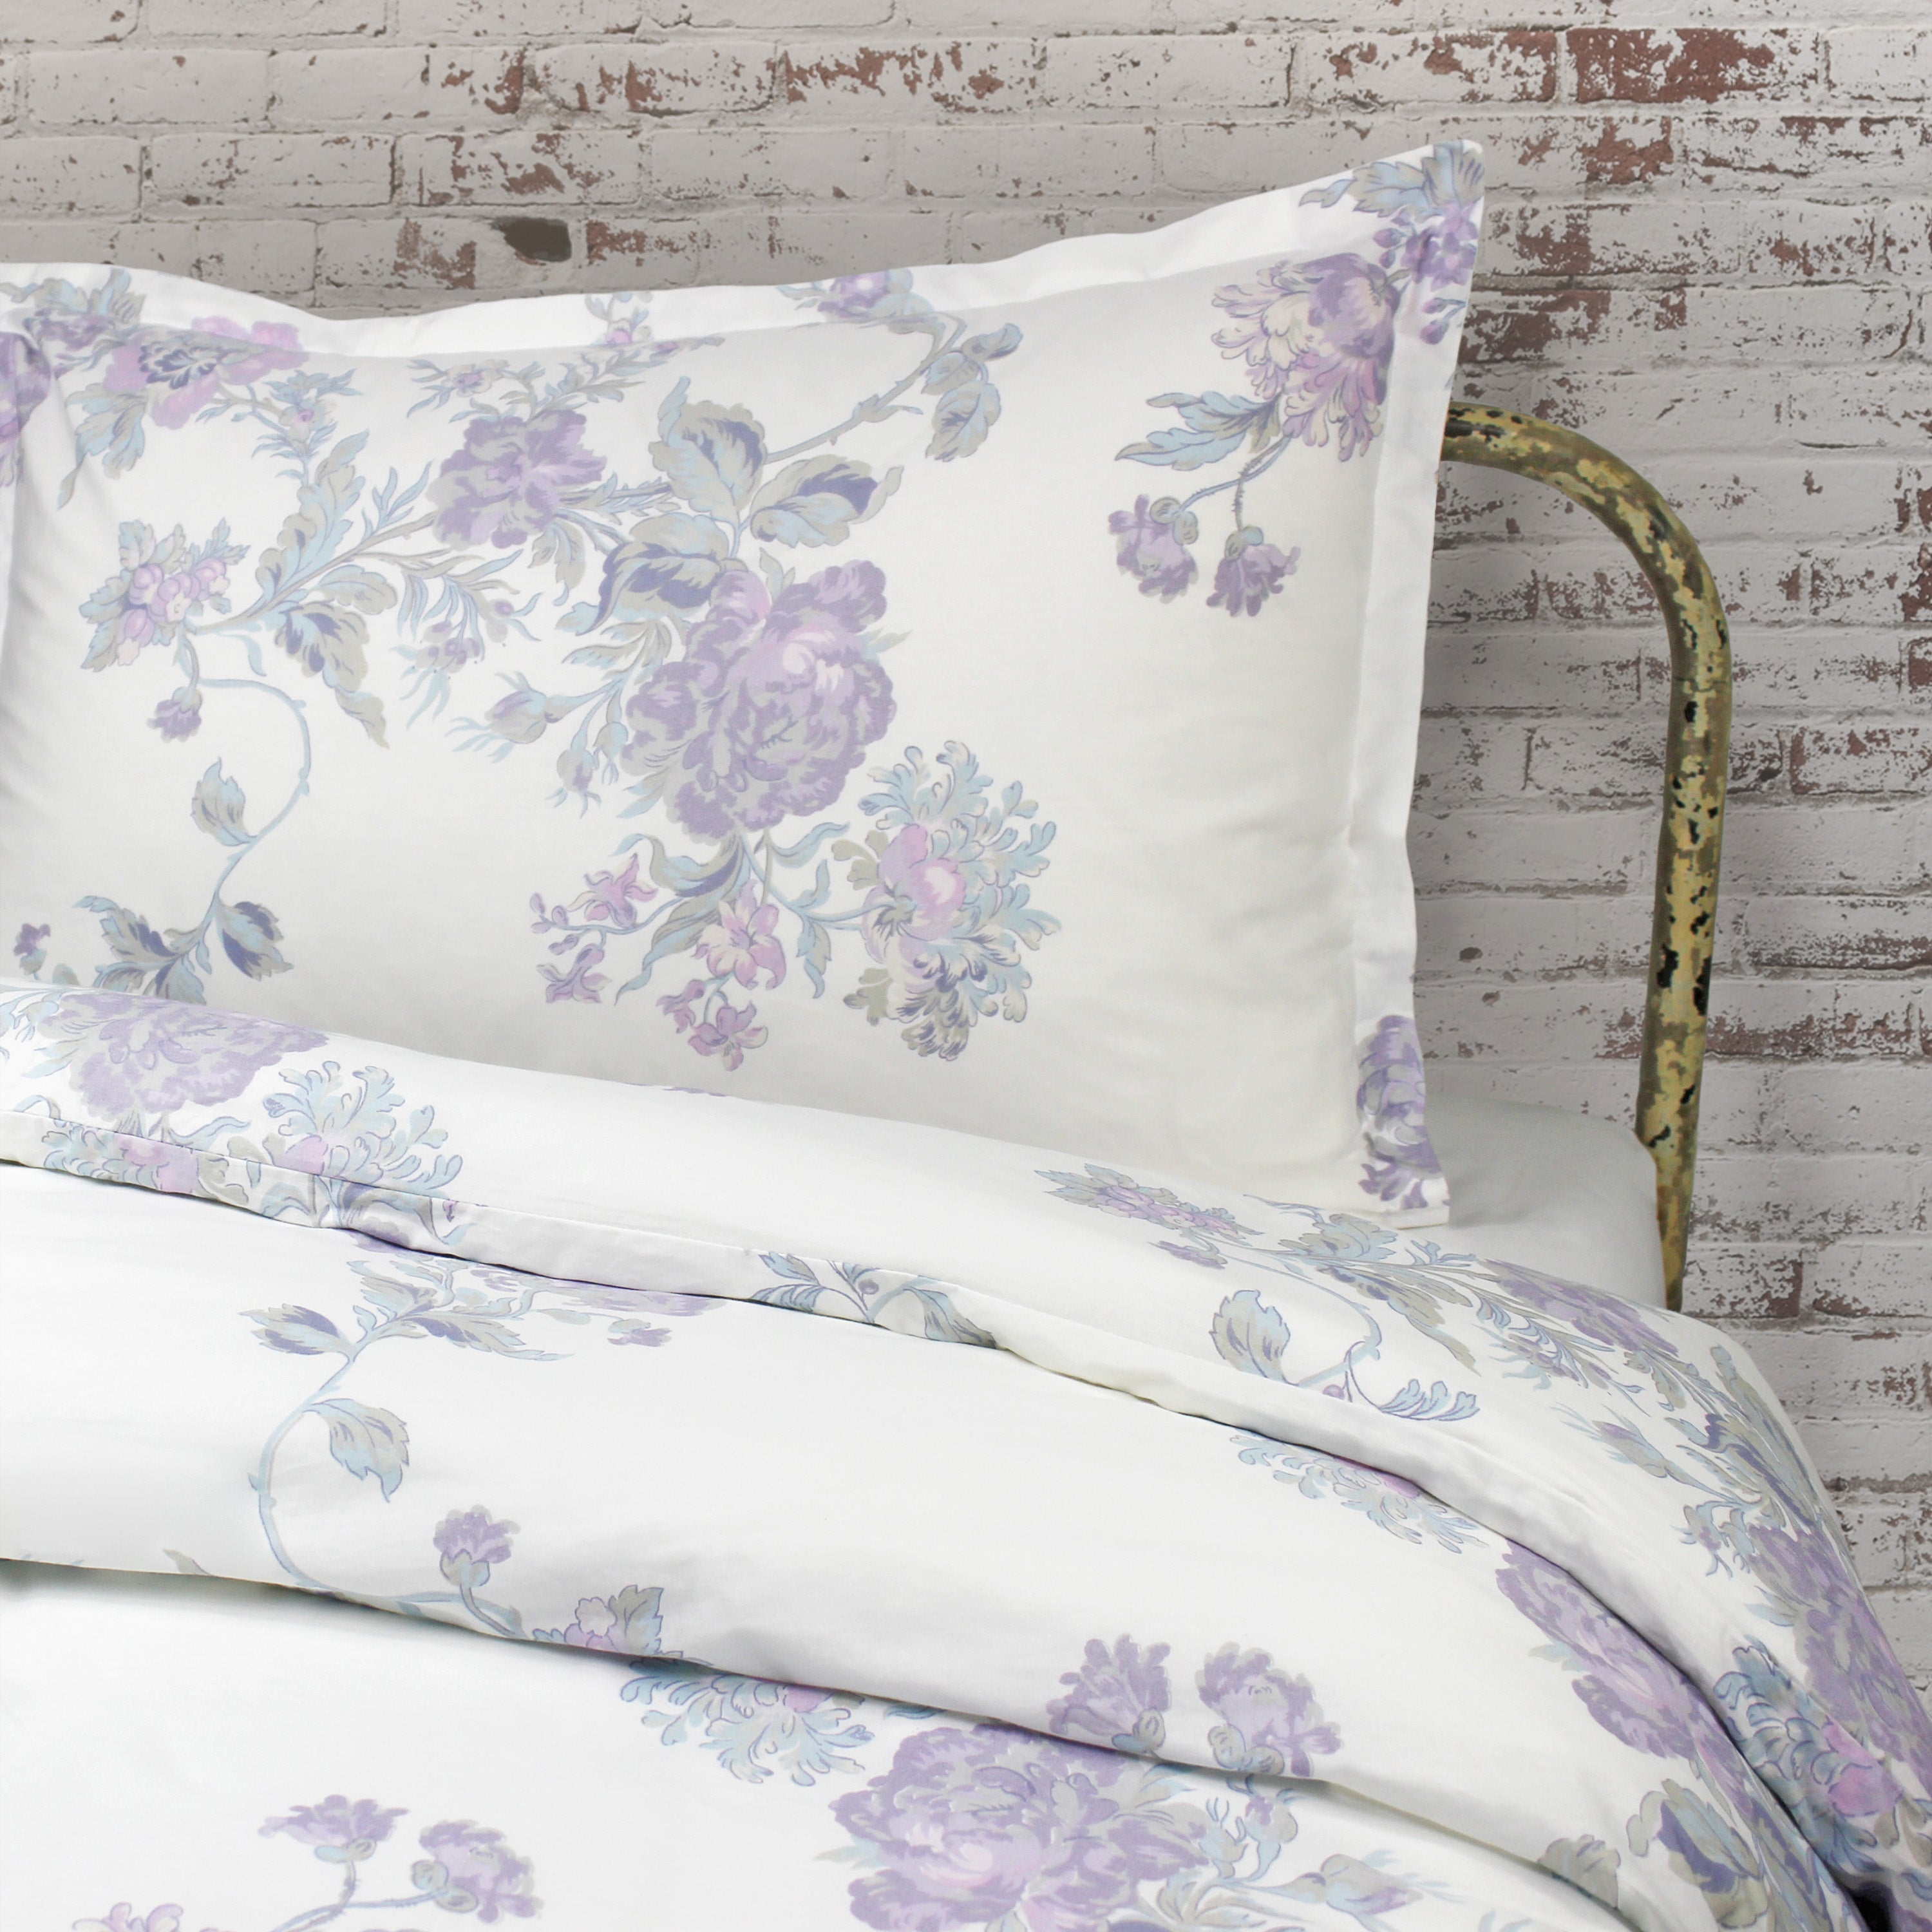 Printed Cotton Percale Duvet Cover Sets